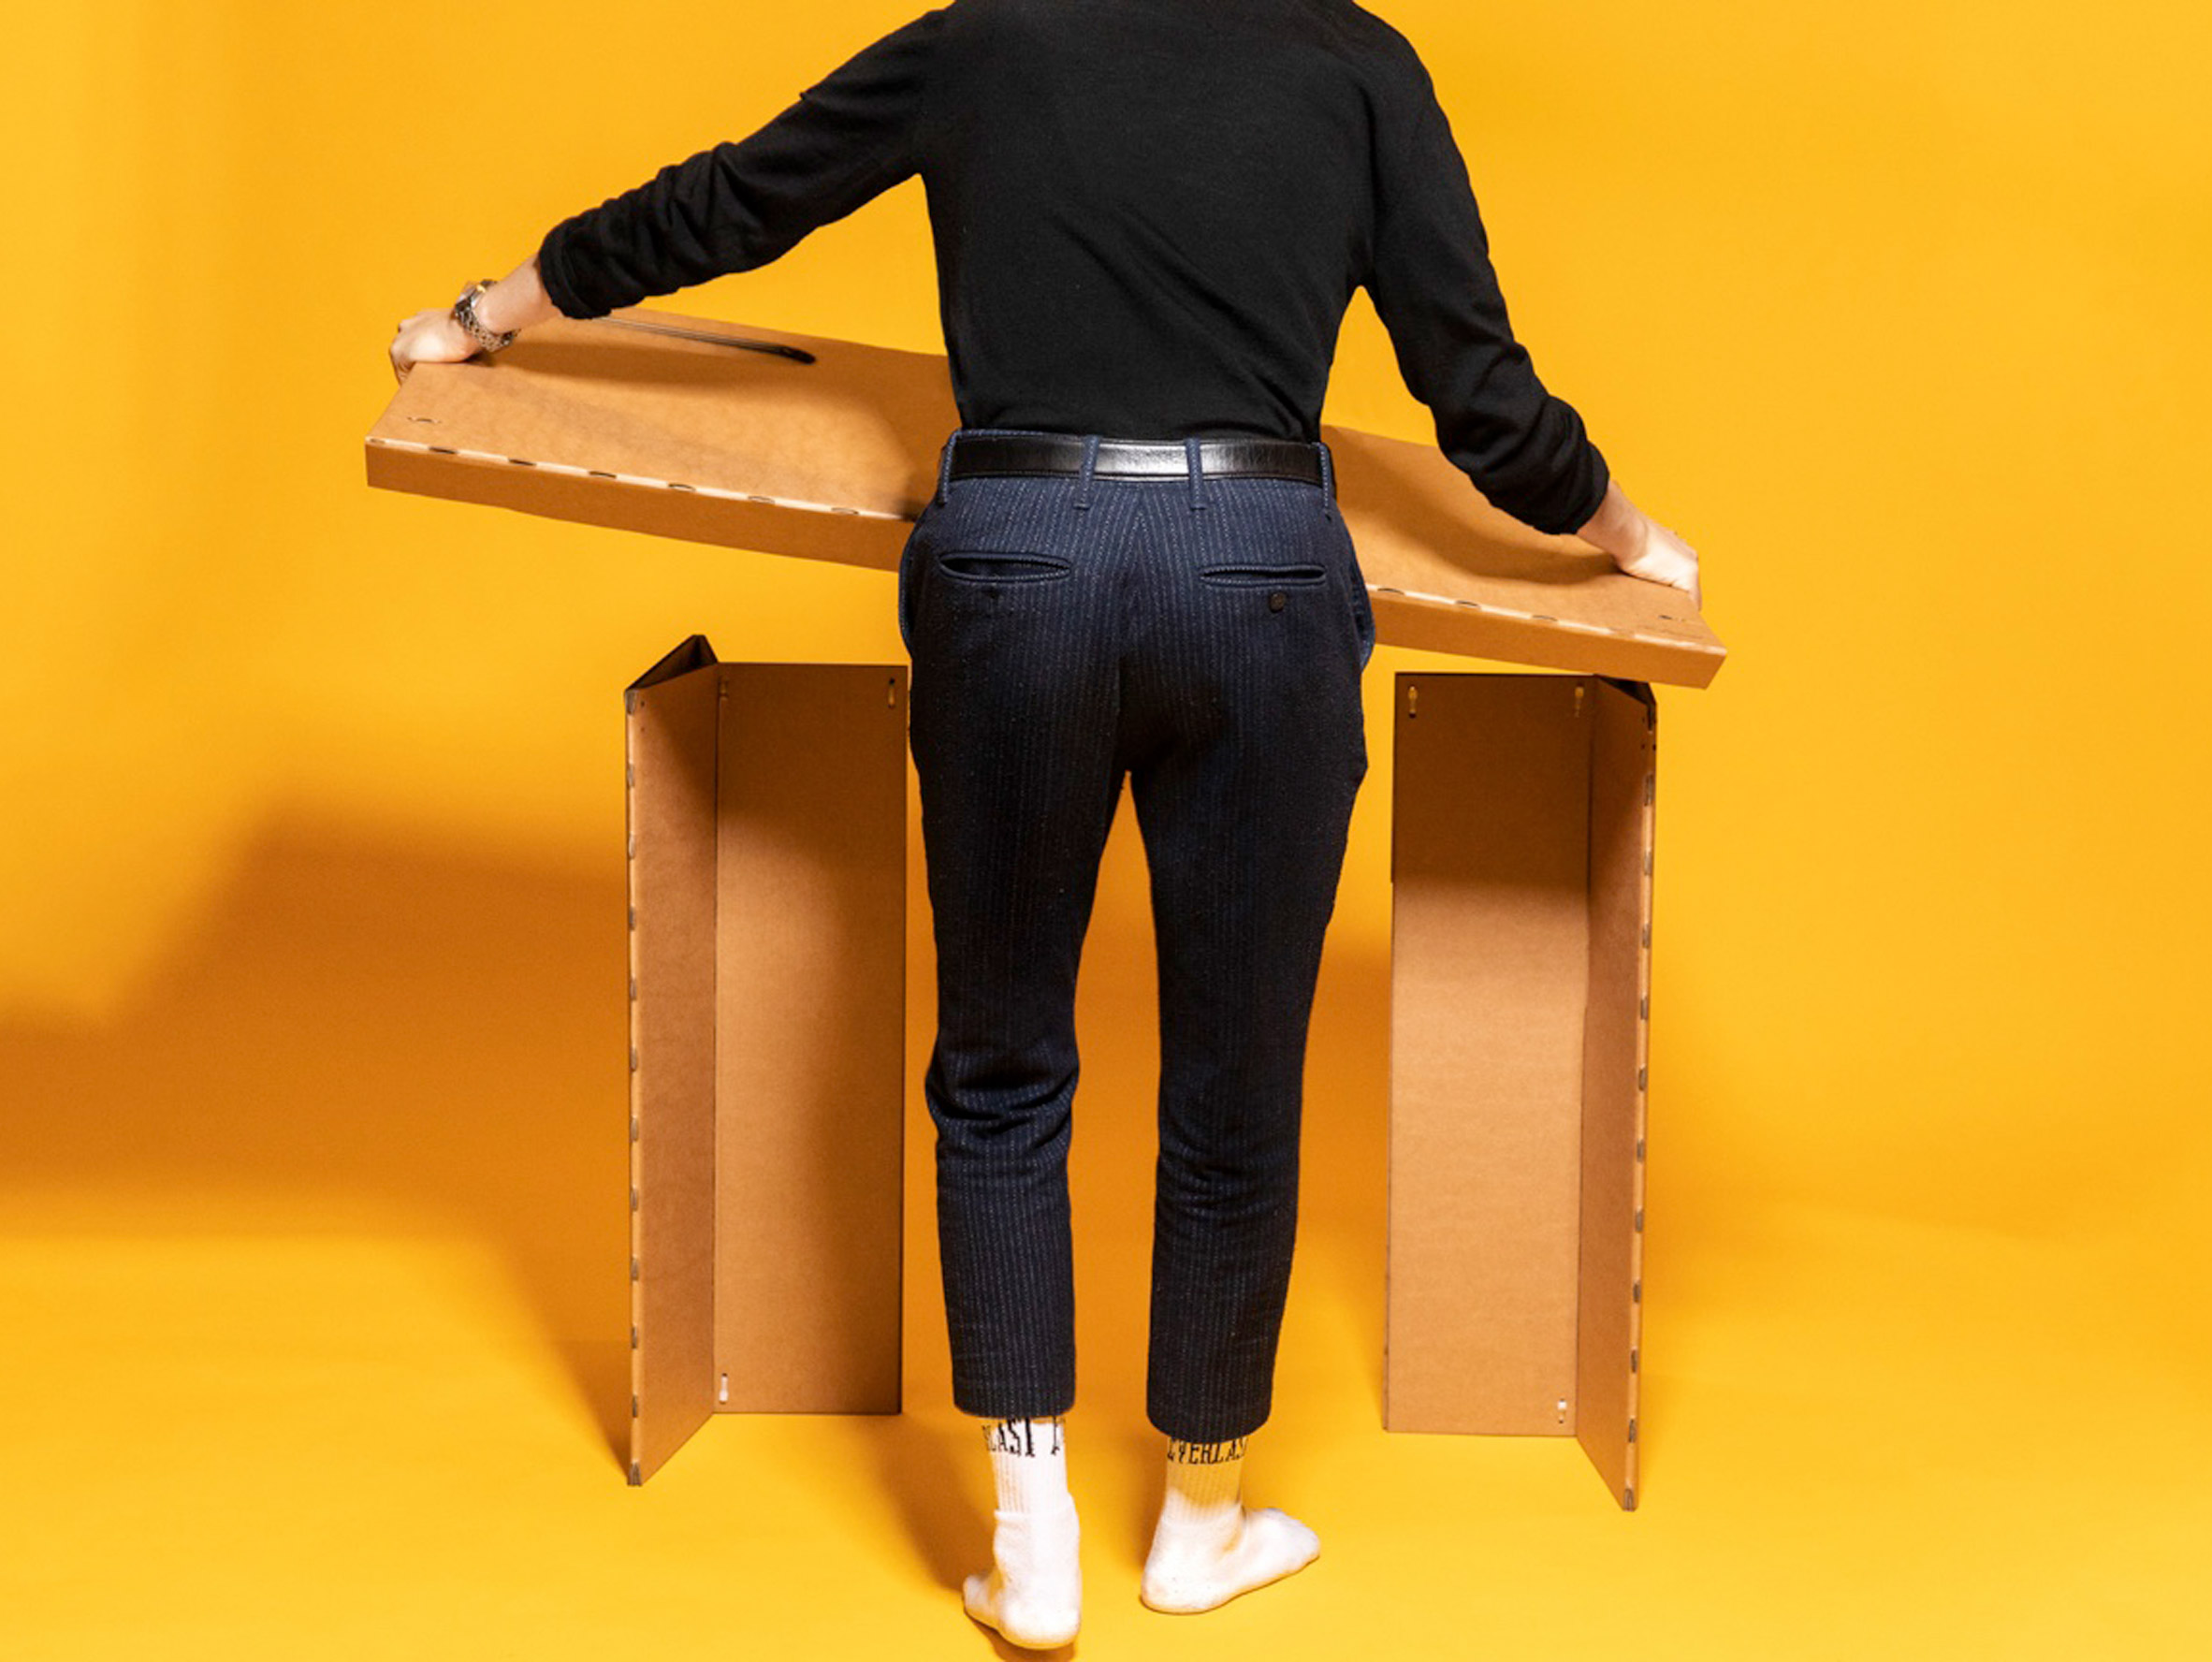 The desk can be easily assembled out of three pieces of folded cardboard.